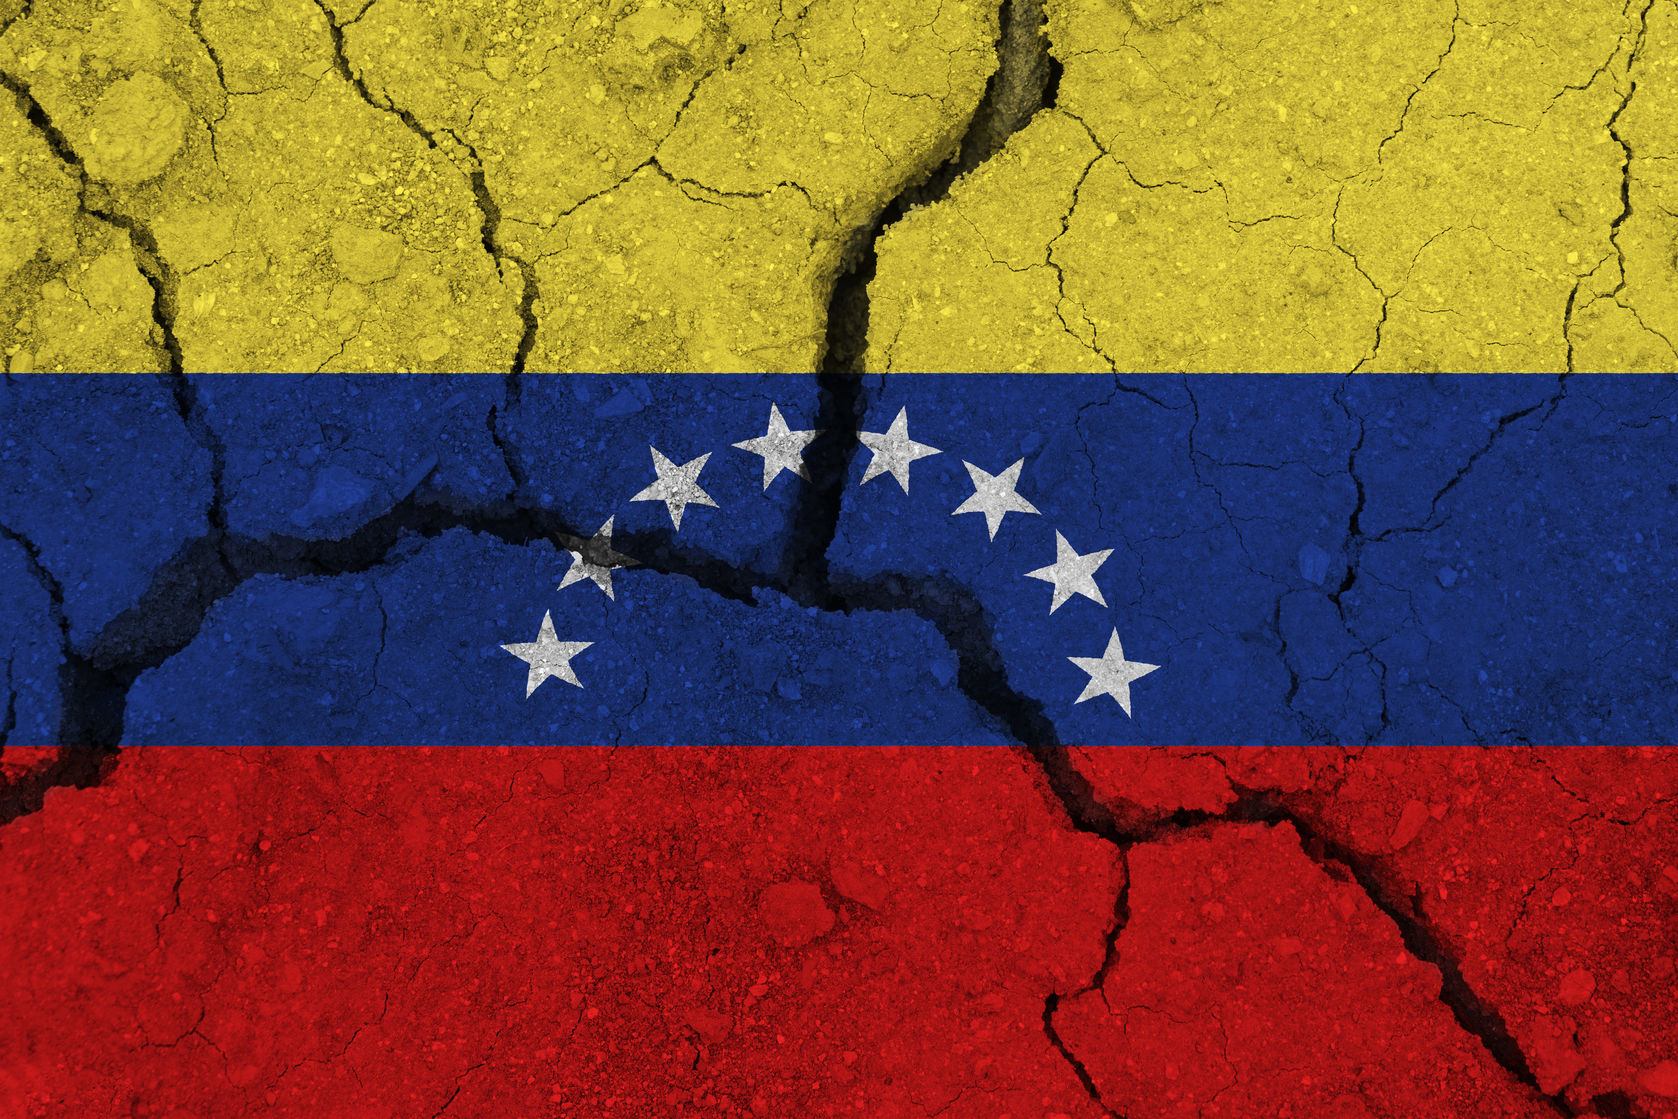 in-a-united-nations-report-a-socialist-details-venezuela-s-horrors